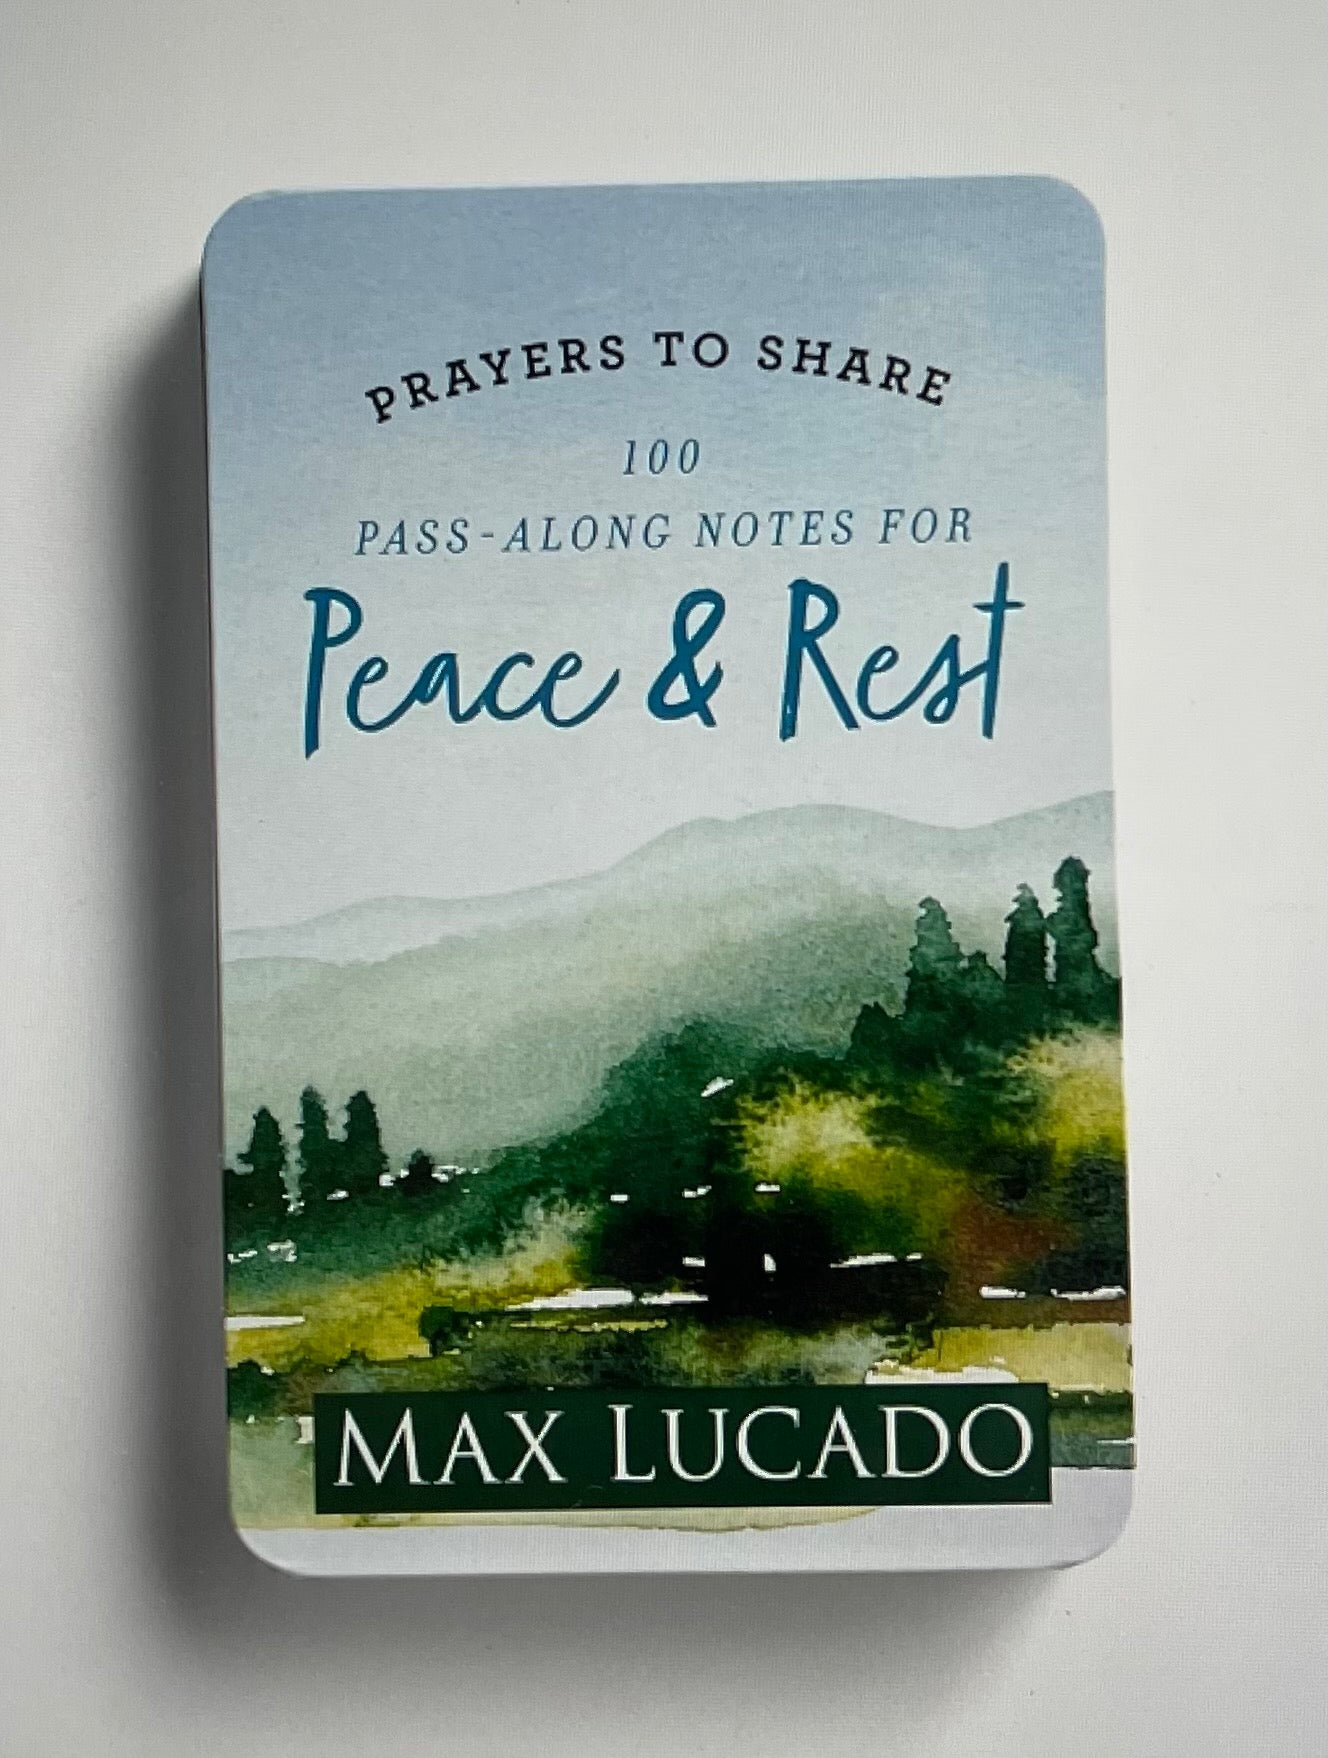 Max Lucado - Prayers to Share: 100 Pass-Along Notes for Peace & Rest